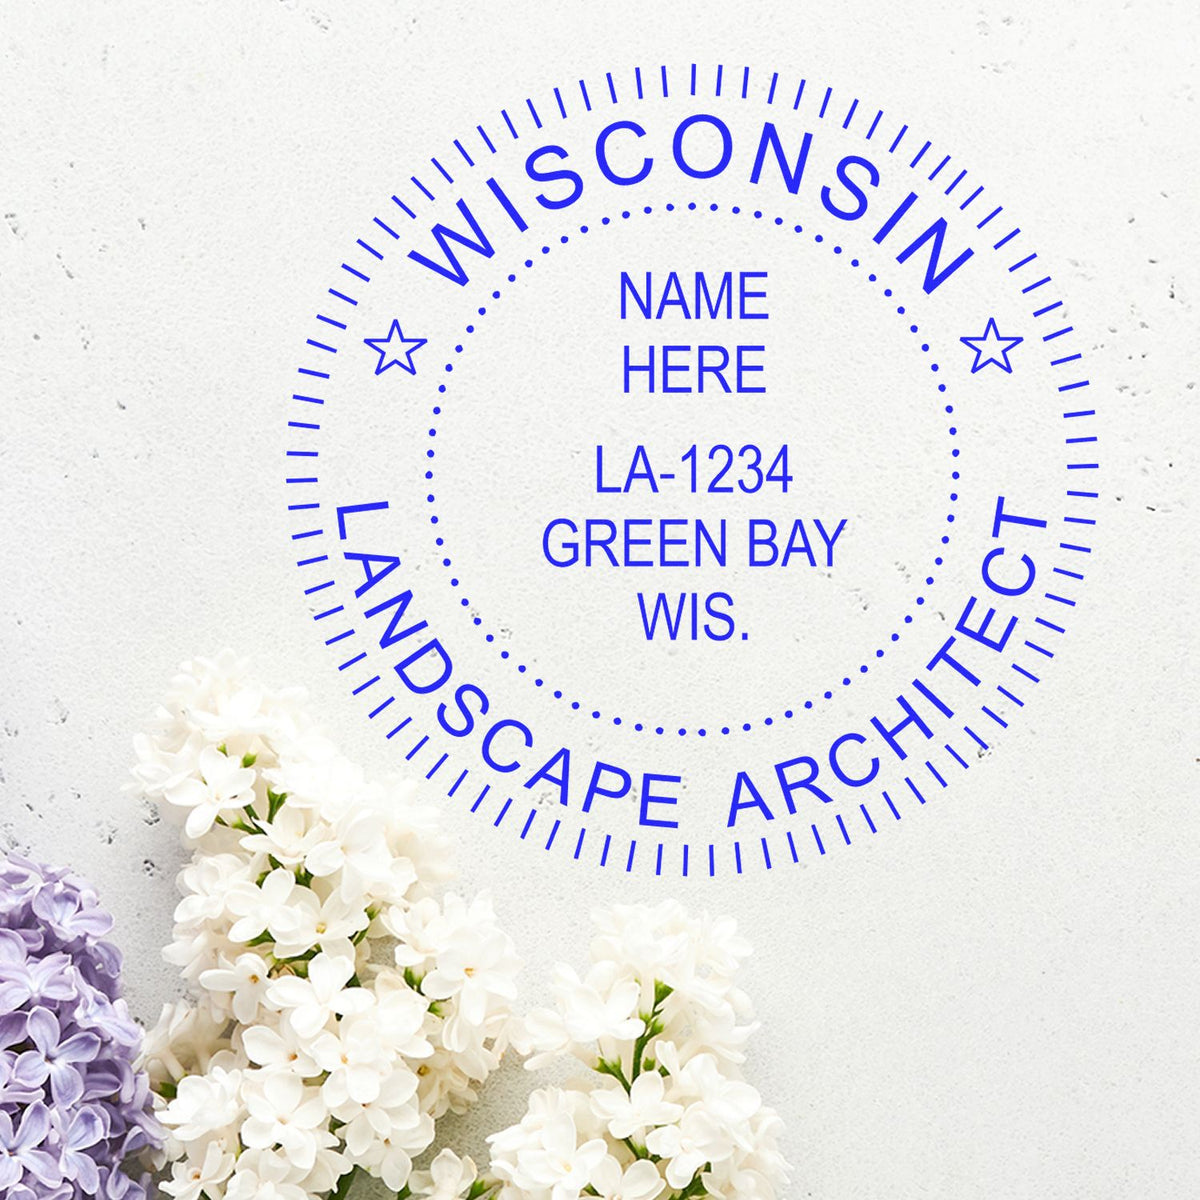 Another Example of a stamped impression of the Slim Pre-Inked Wisconsin Landscape Architect Seal Stamp on a piece of office paper.